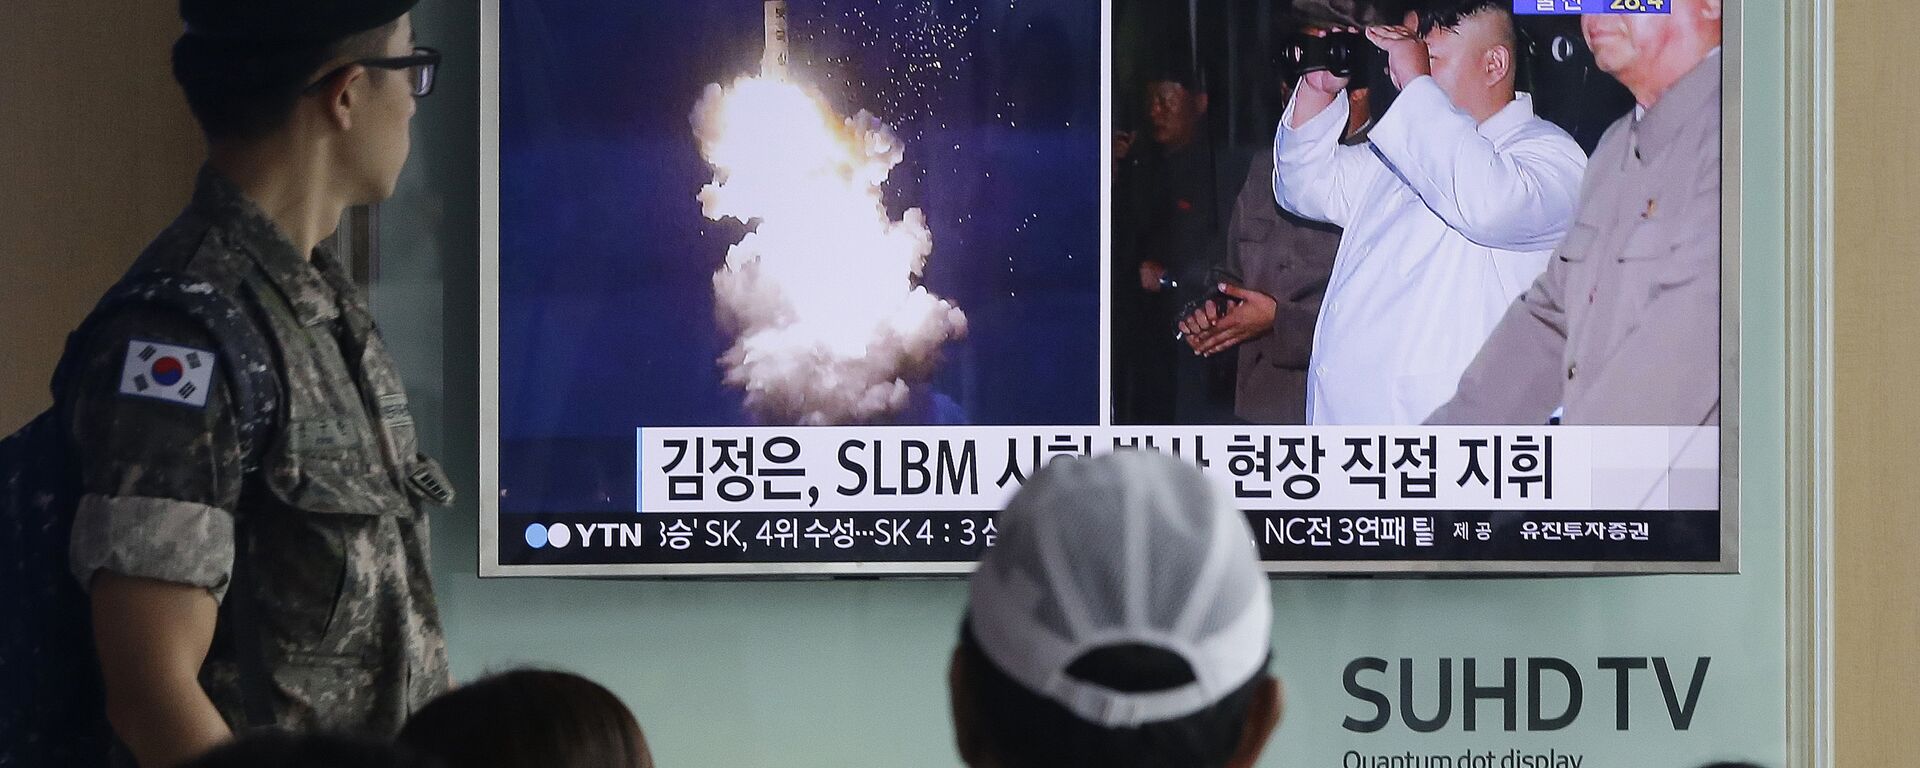 South Korean army soldier watches a TV news program showing images published in North Korea's Rodong Sinmun newspaper of North Korea's ballistic missile believed to have been launched from underwater and North Korean leader Kim Jong-un, at Seoul Railway station in Seoul, South Korea (File) - Sputnik International, 1920, 24.03.2023